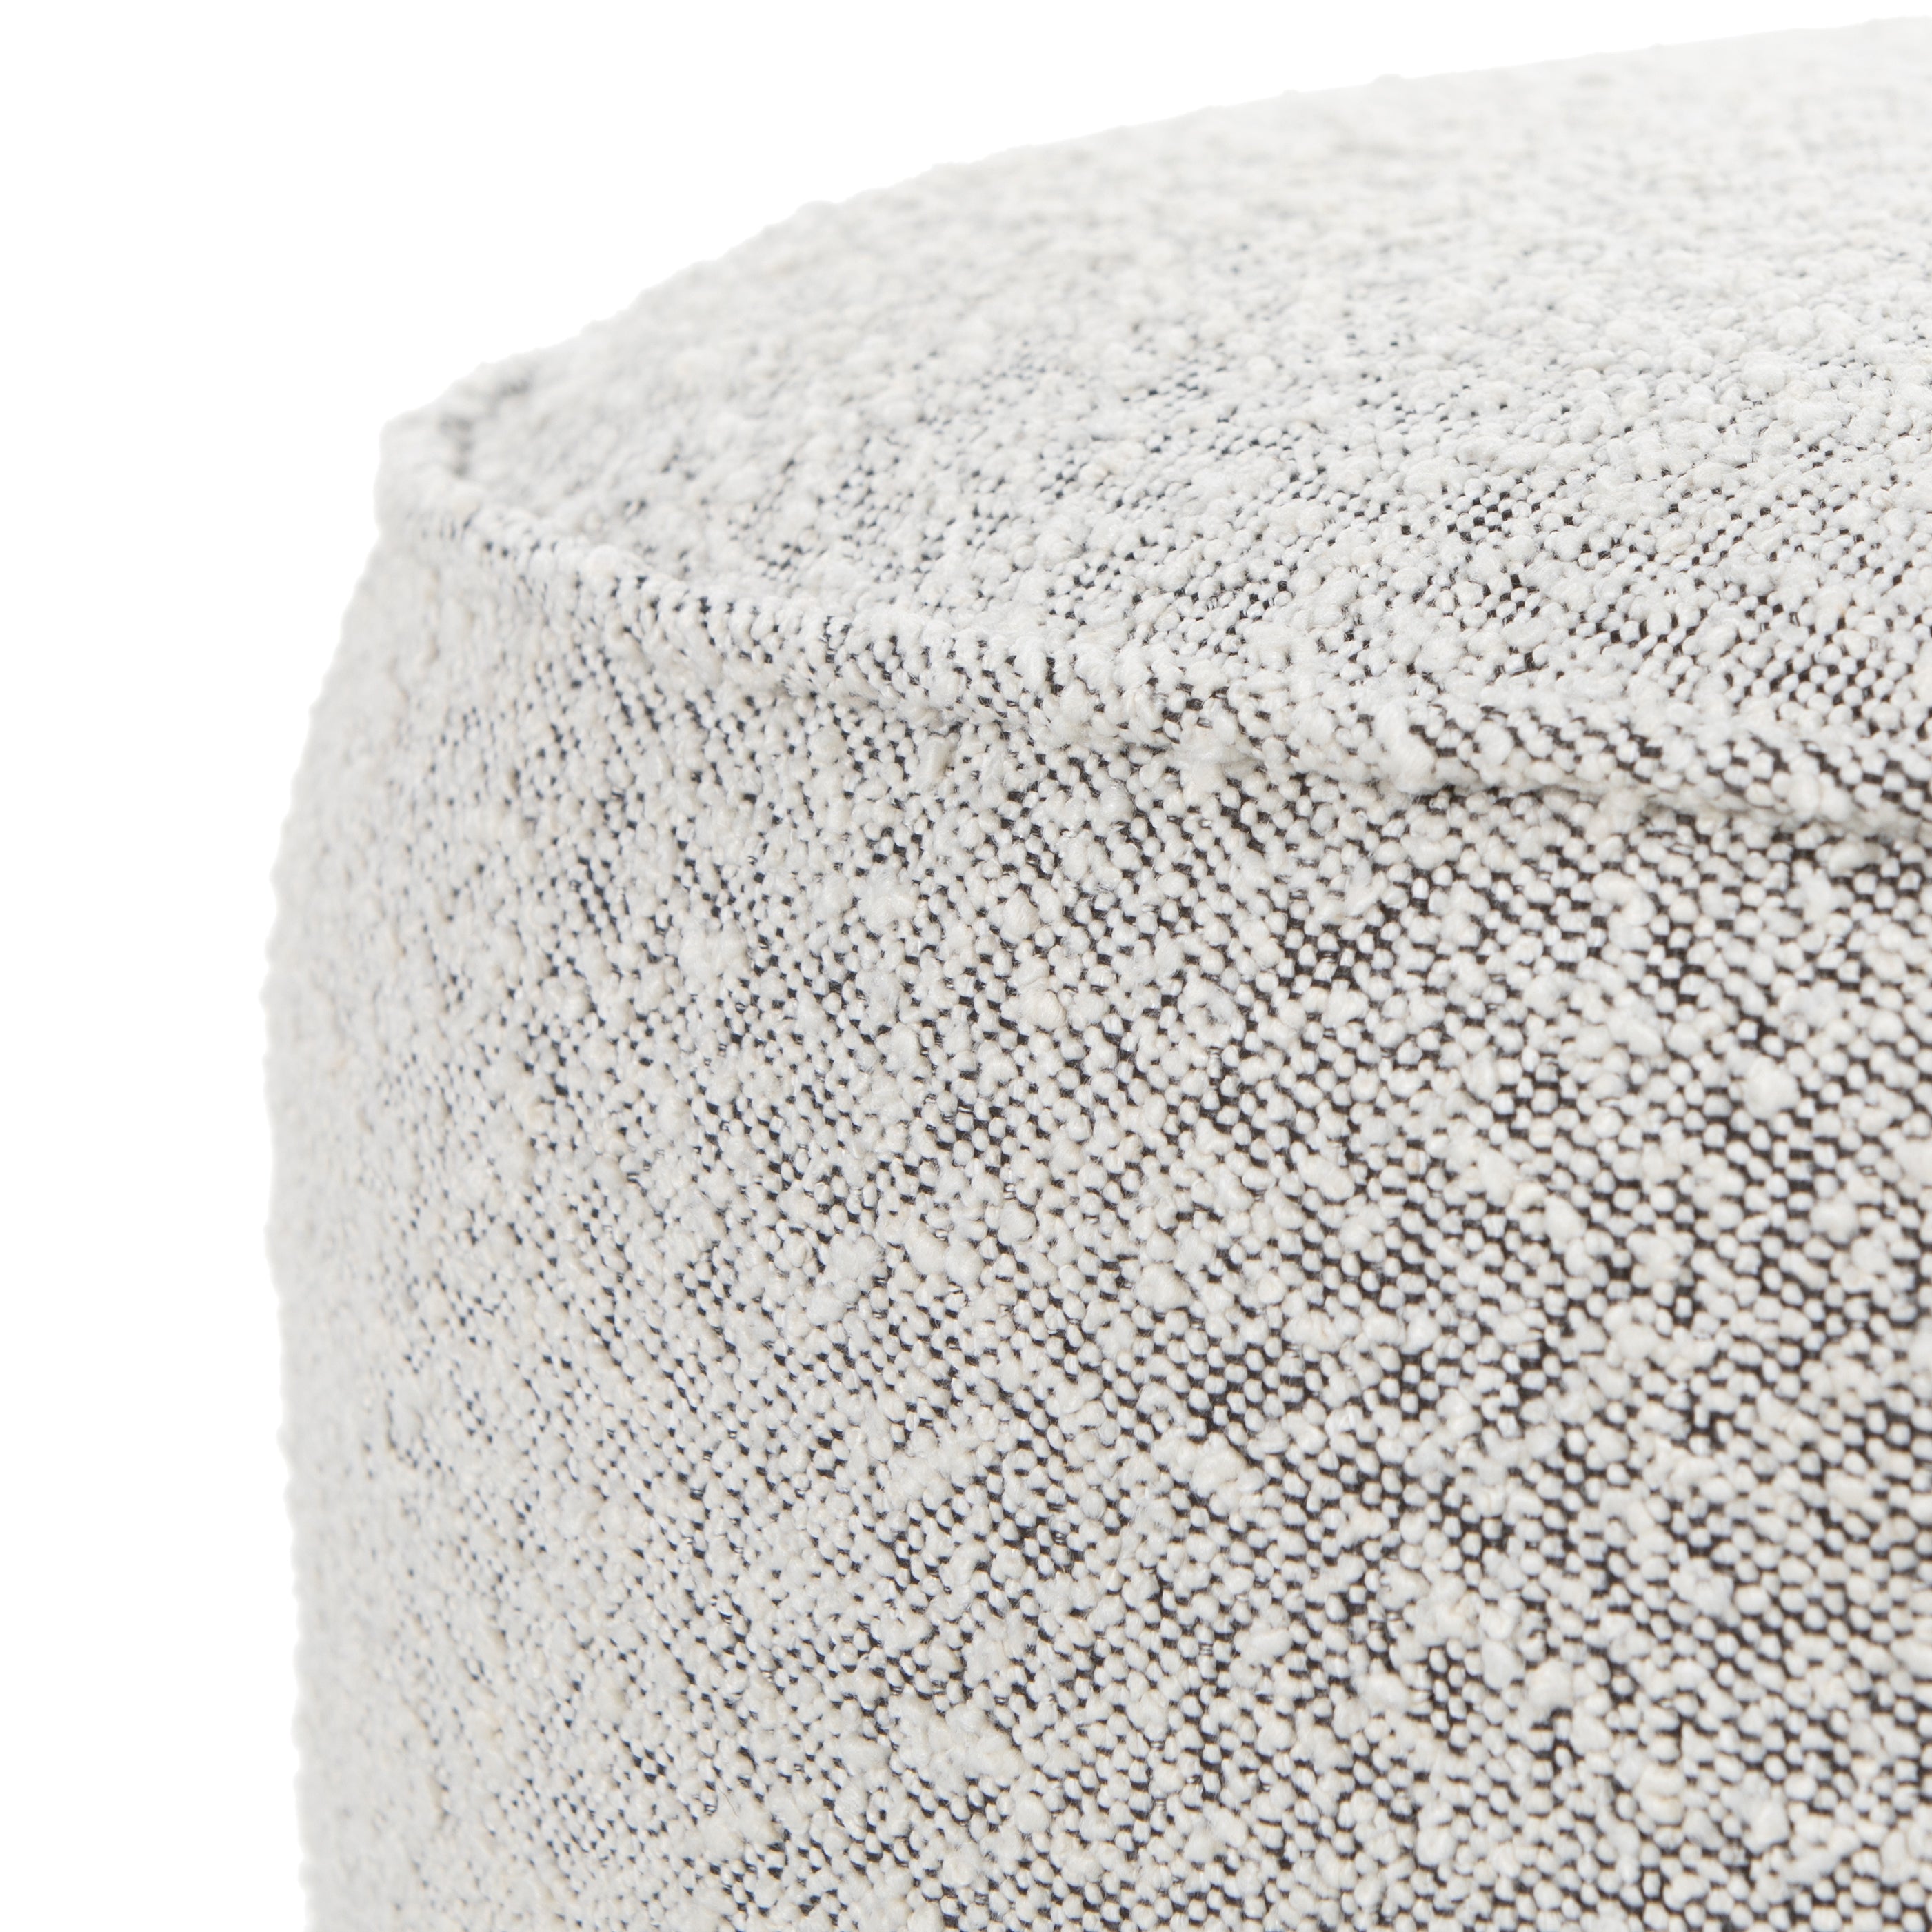 Knoll Domino Fabric &amp; Brushed Ebony Parawood | Sinclair Round Ottoman | Valley Ridge Furniture